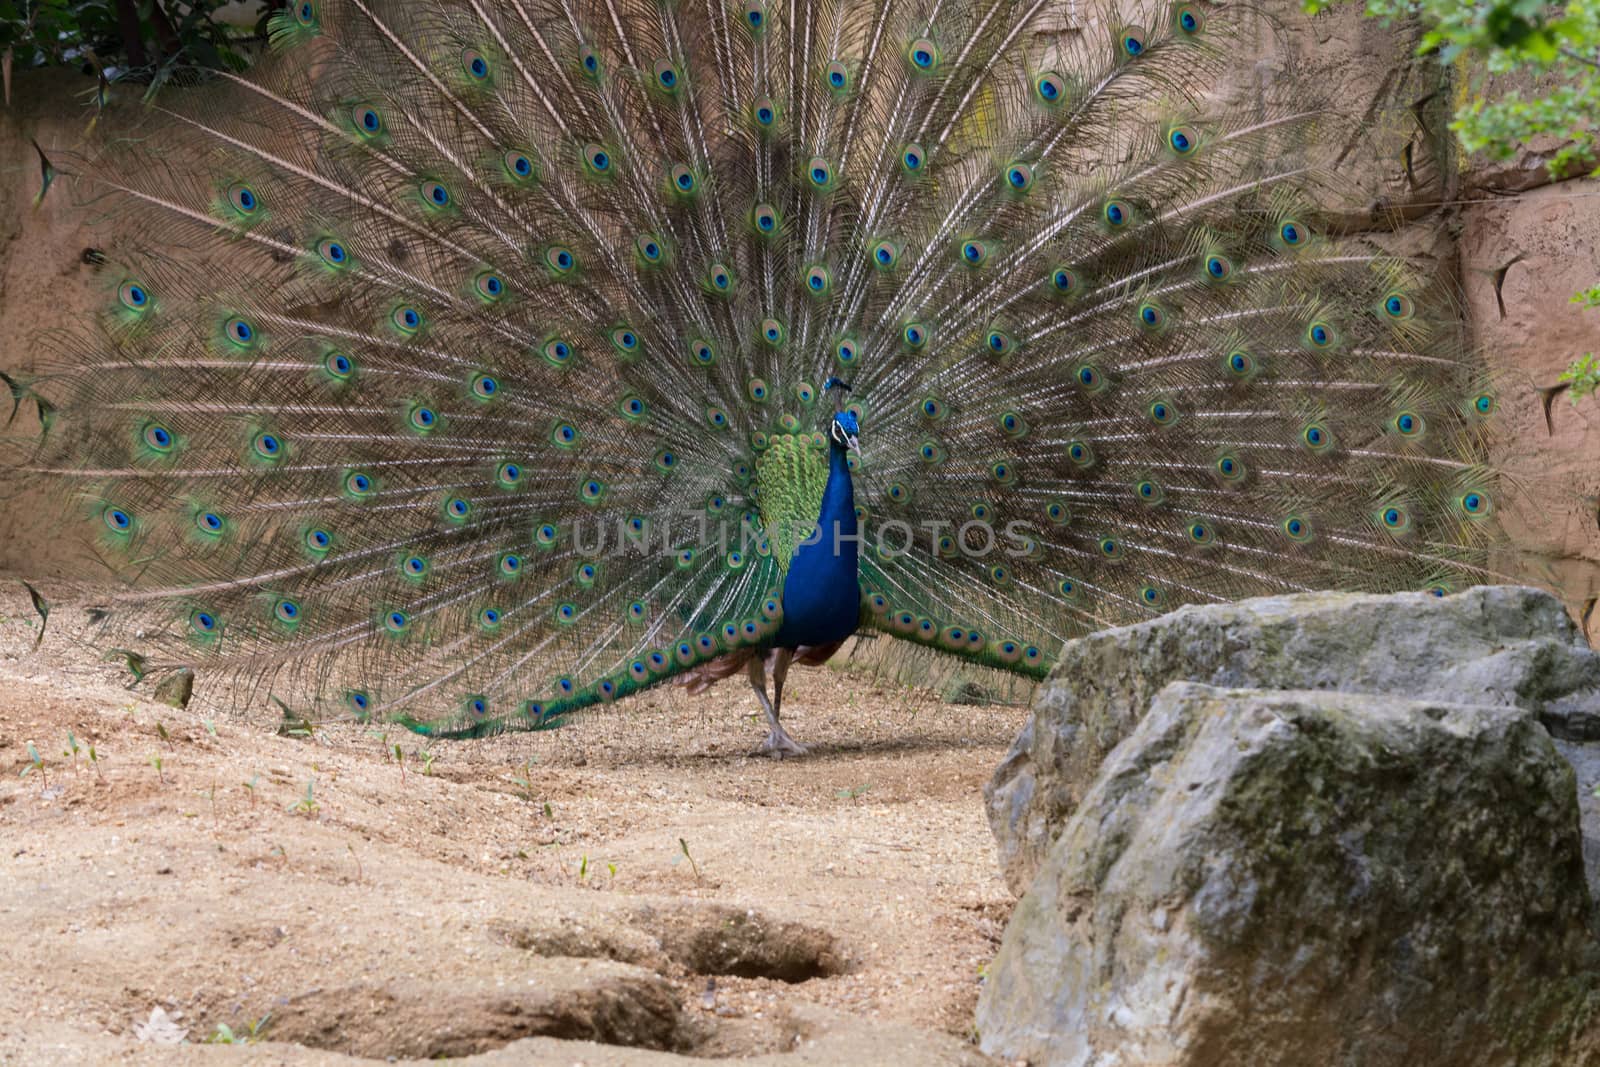 Indian Male Peacock            by JFsPic